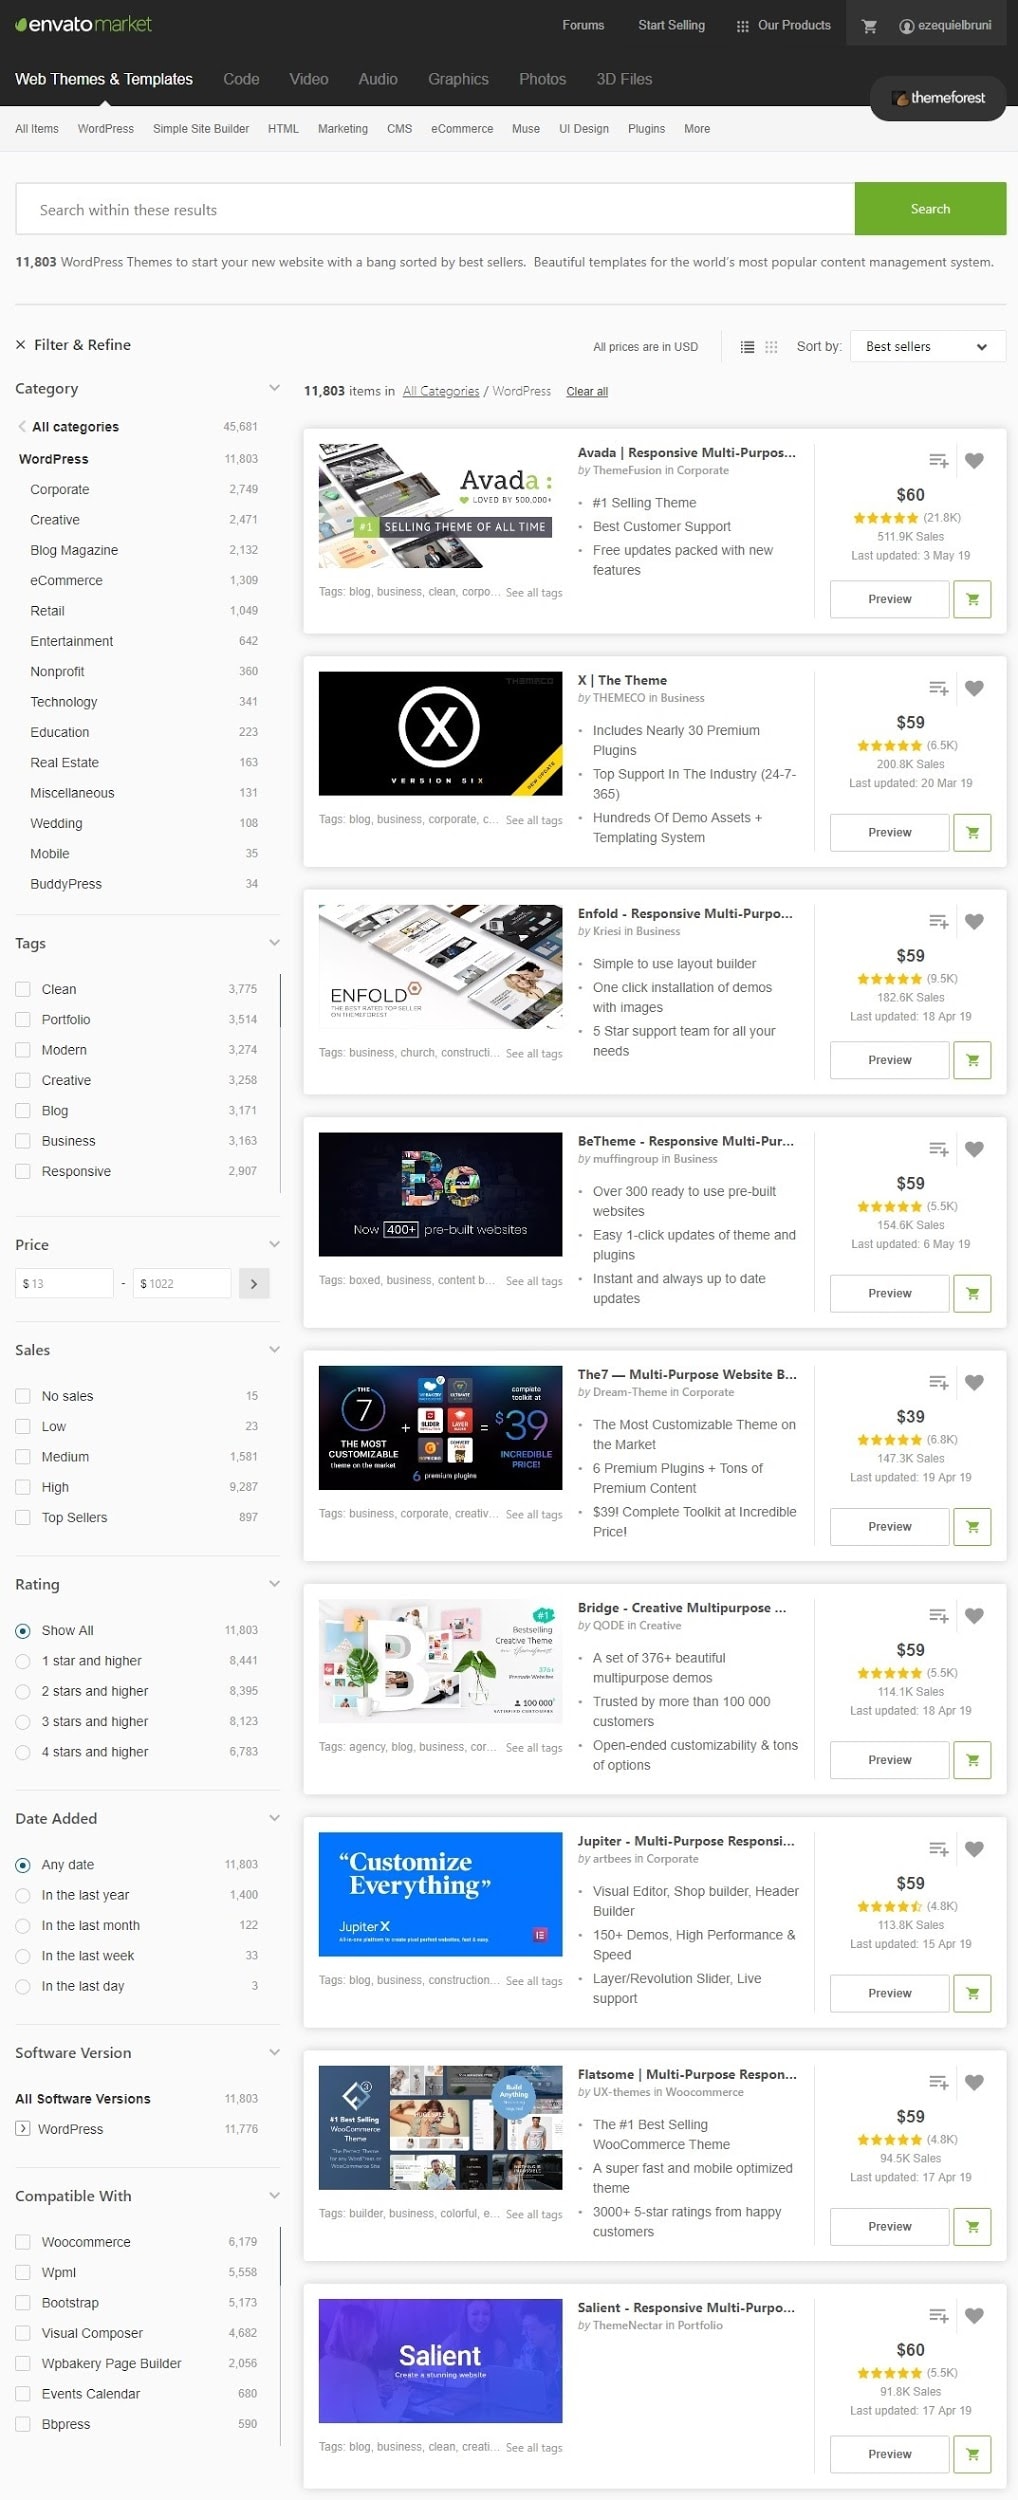 ThemeForest Review – The Truth about this Marketplace 2022-image1